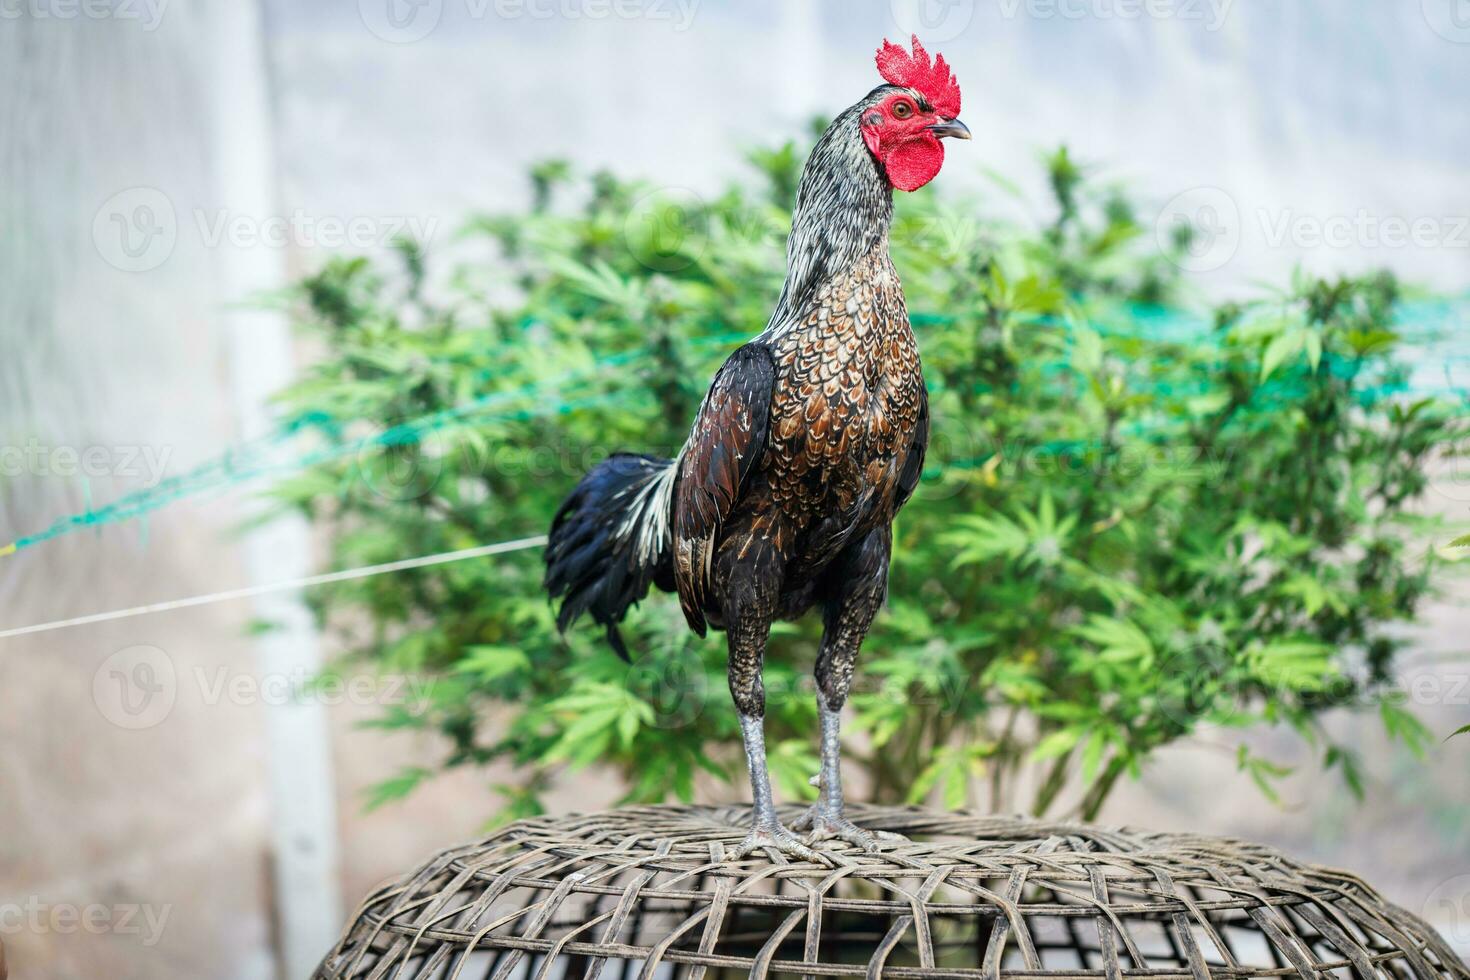 Beautiful Rooster standing in blurred nature green background. Thai rooster,Thai cockfighting,  chicken standing. photo